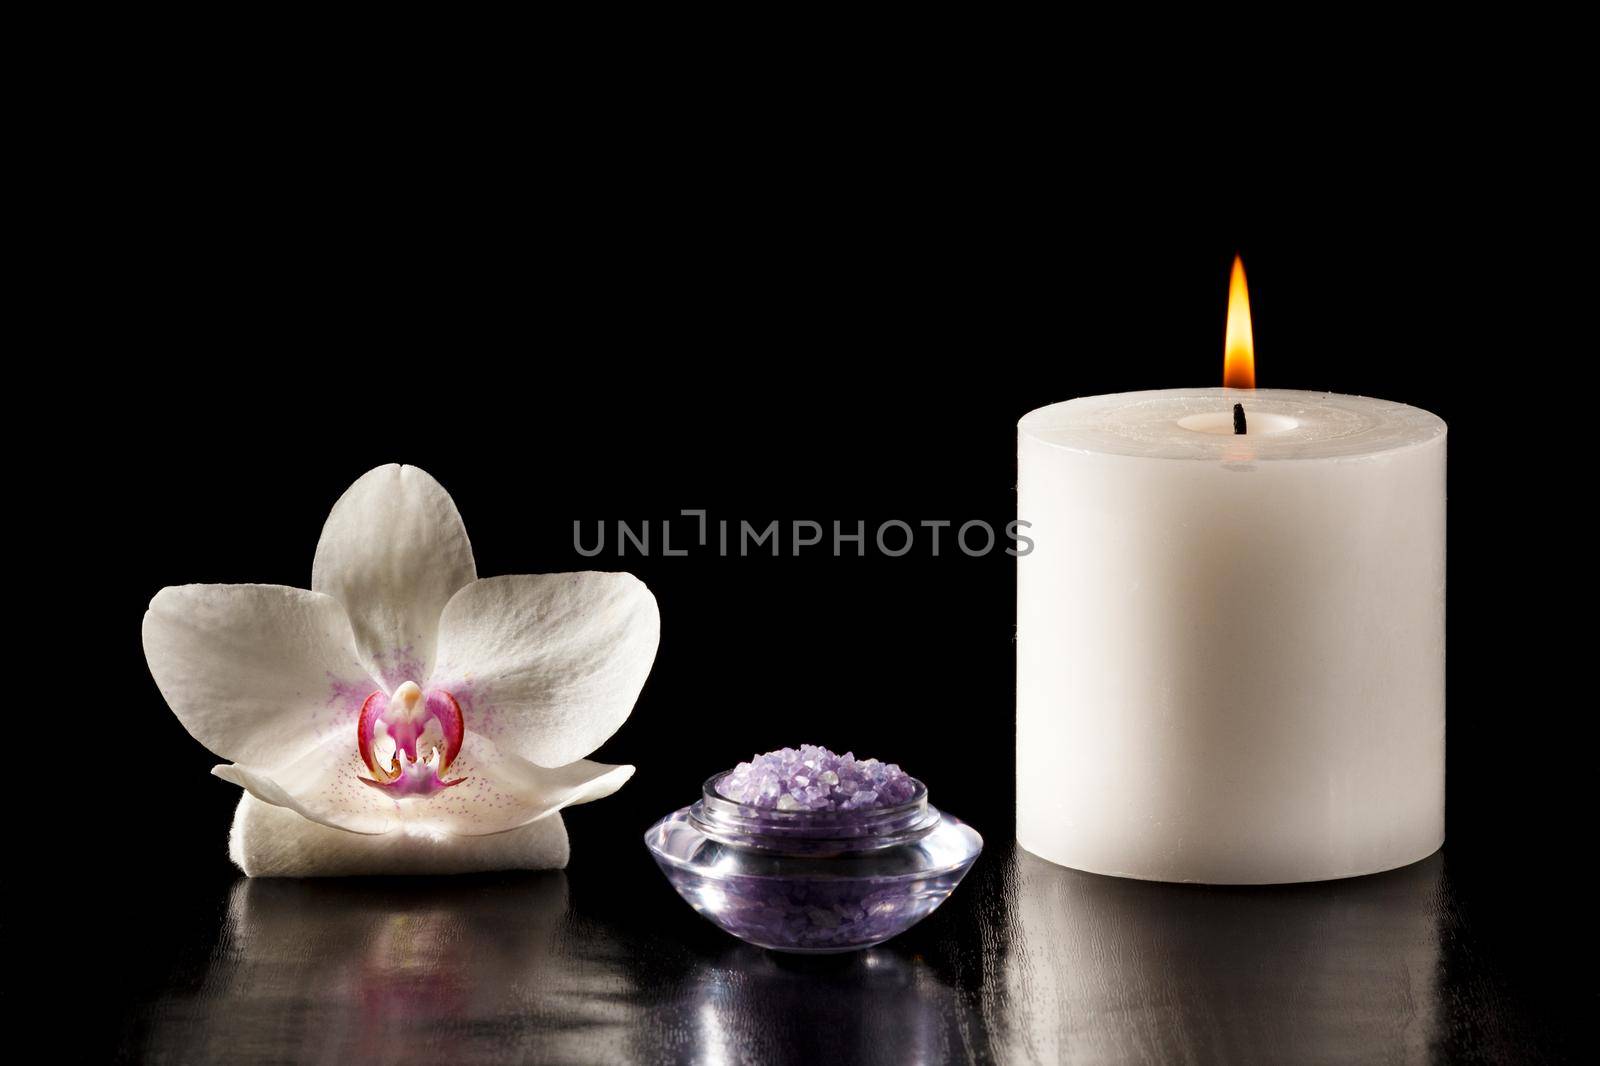 White orchid flower, bowl with sea salt for spa, candle on black background